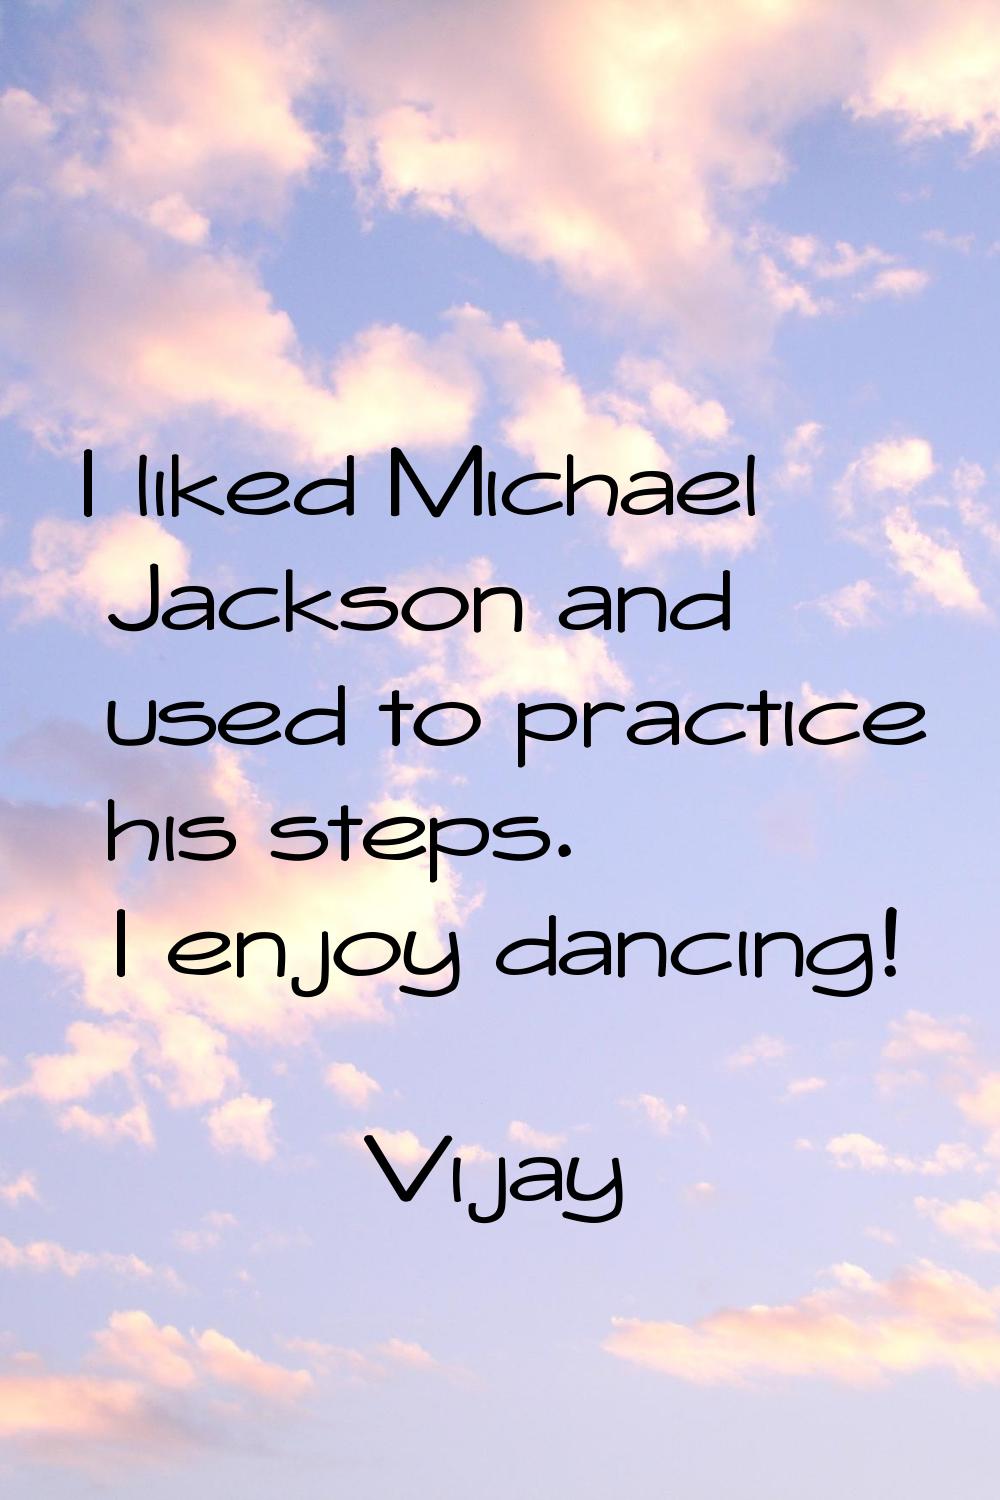 I liked Michael Jackson and used to practice his steps. I enjoy dancing!